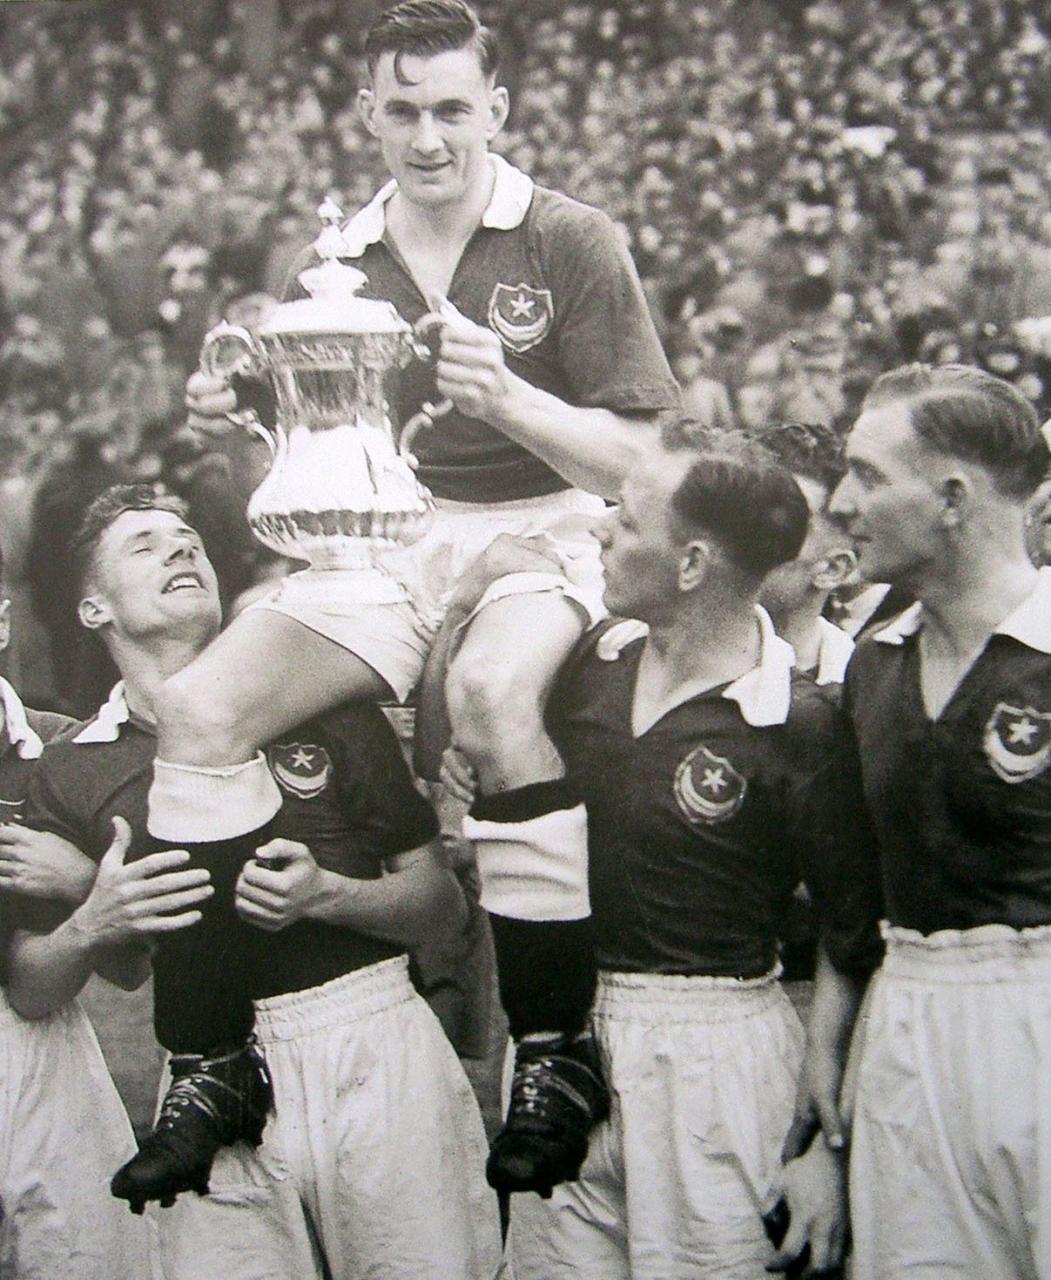 PompeyHistorySociety on X: "Jimmy McAlinden (left) and Guy Wharton carry skipper Jimmy Guthrie aloft as #Pompey show the FA Cup to their fans at Wembley #OTD in 1939. On the right of